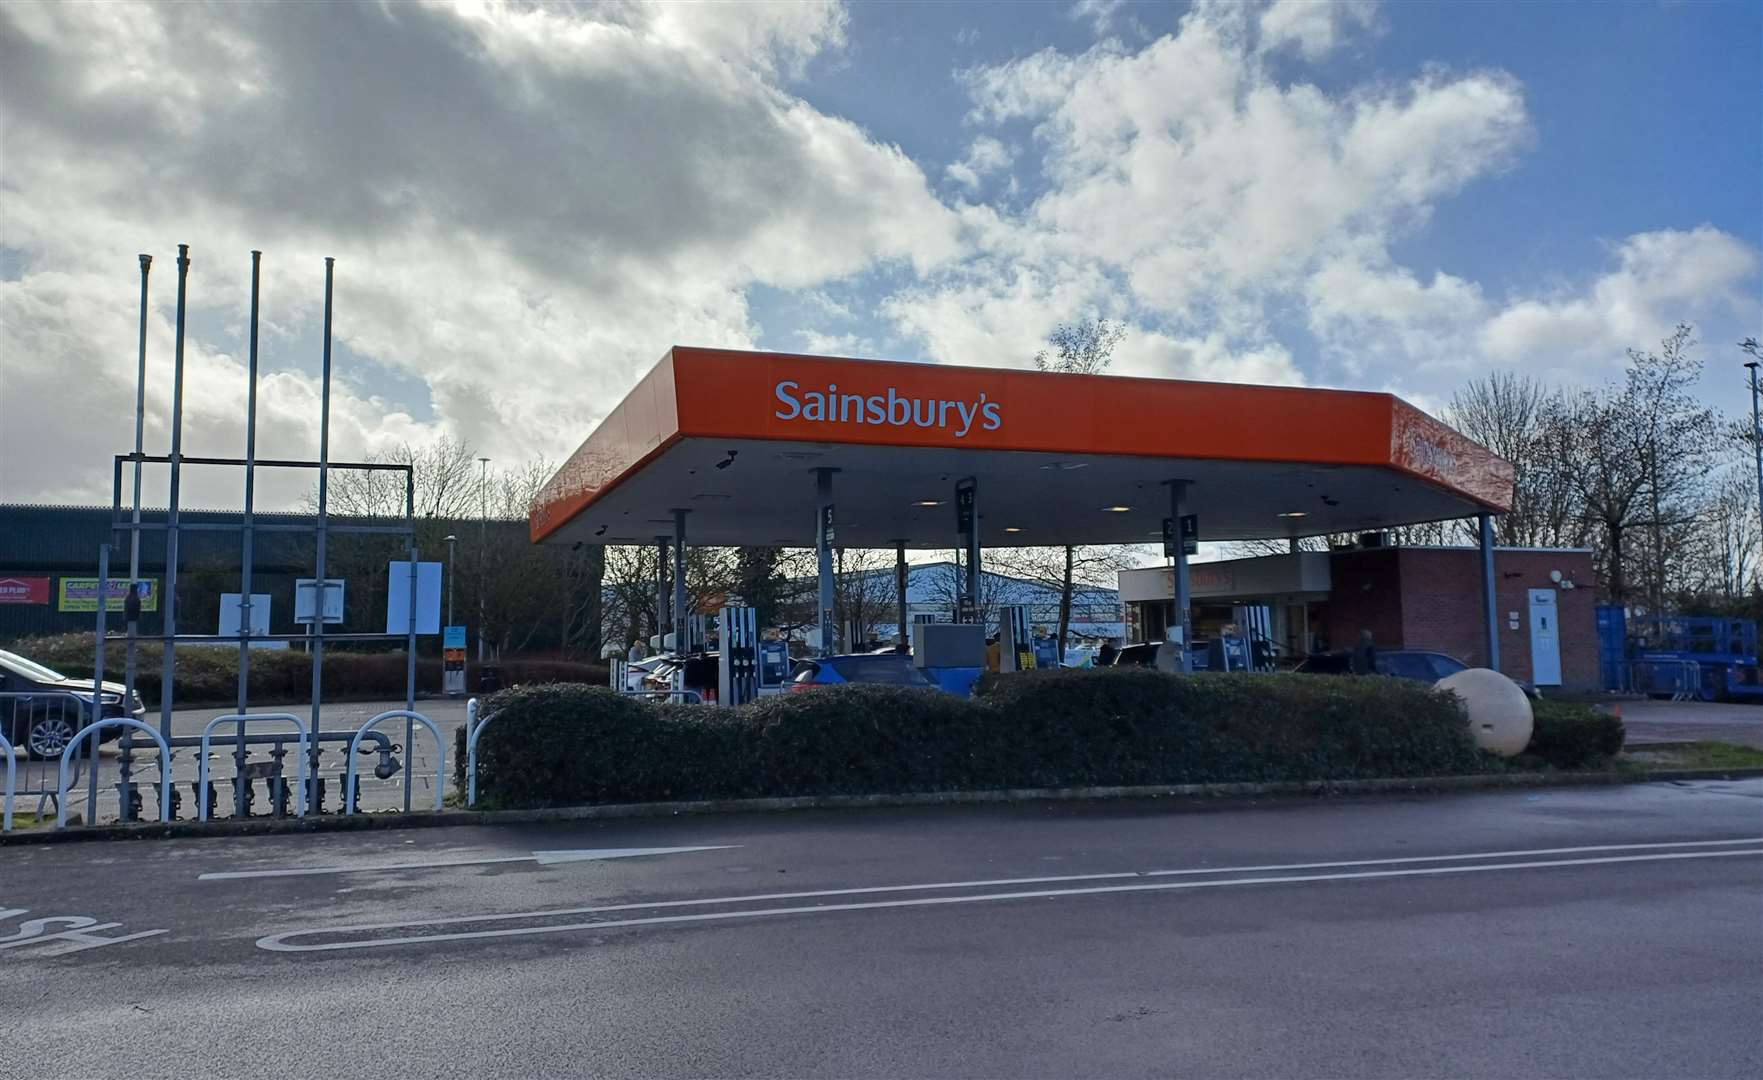 Sainsbury's Petrol Station in Quarry Wood Industrial Estate has now reopened